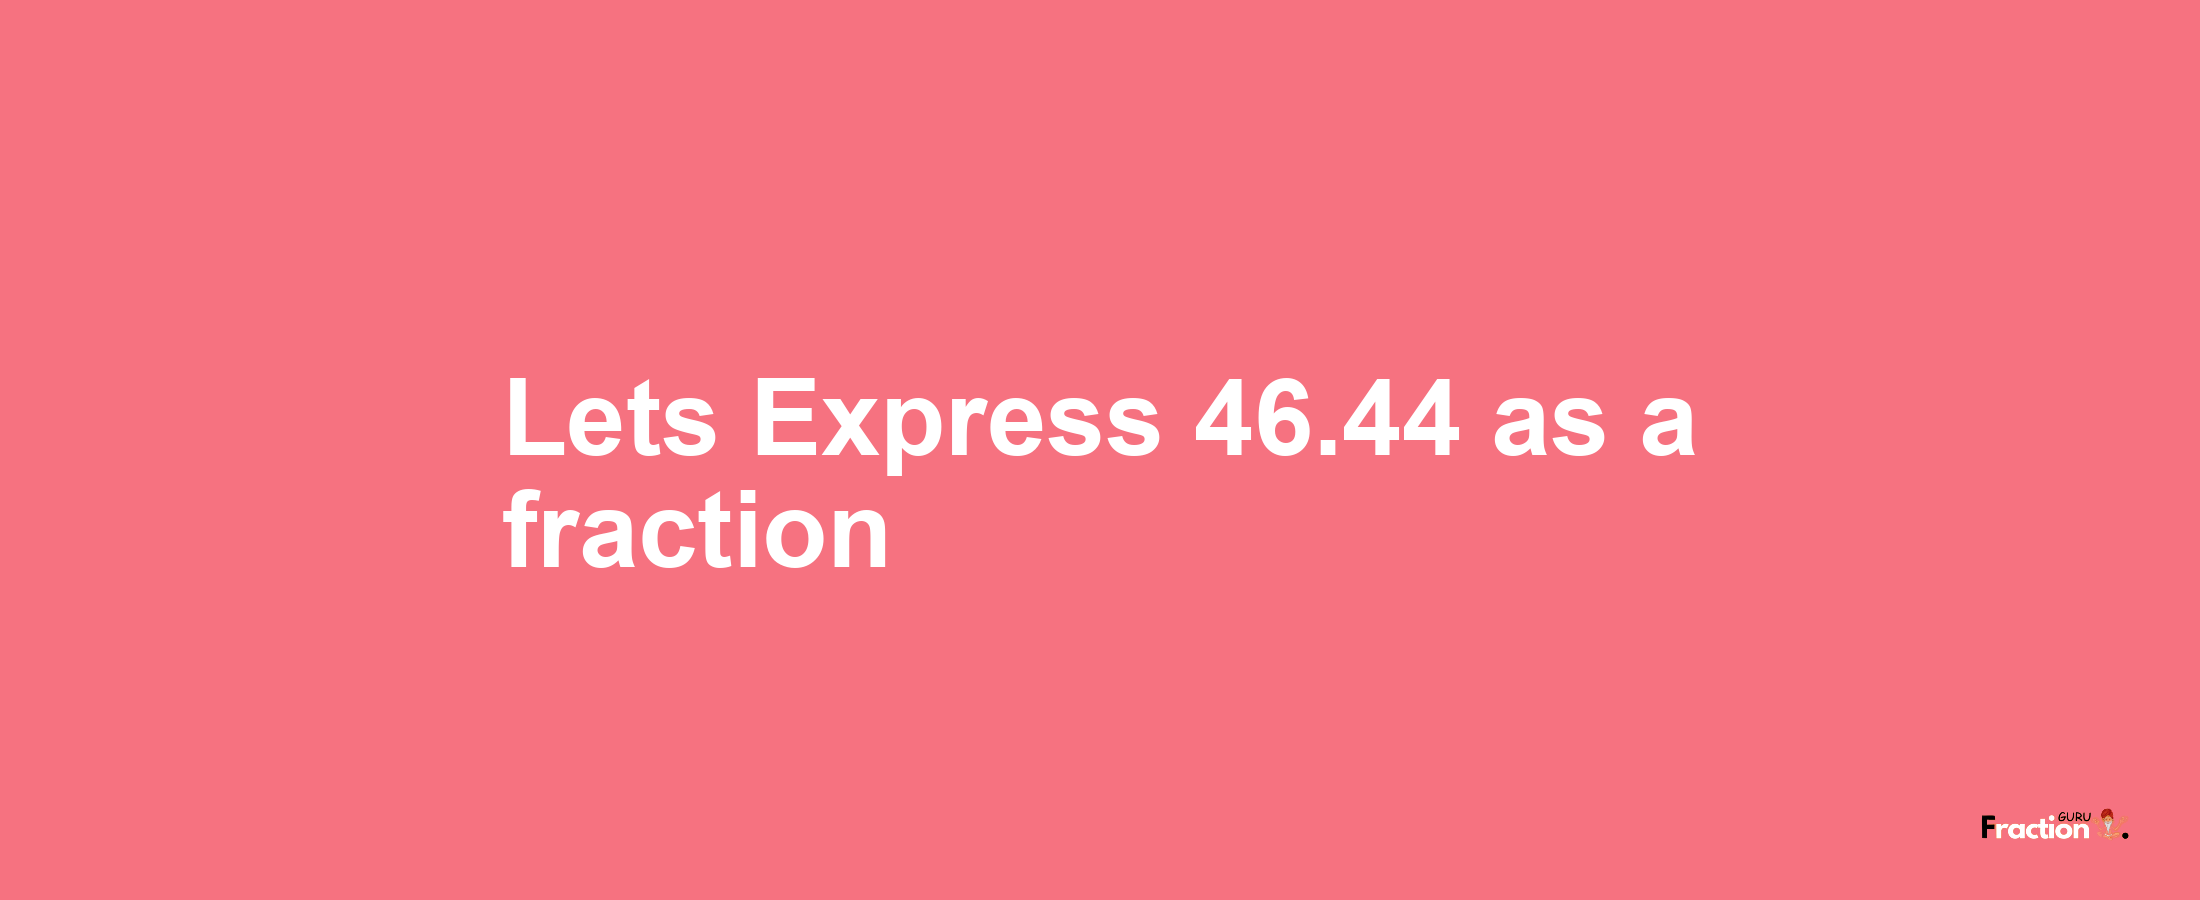 Lets Express 46.44 as afraction